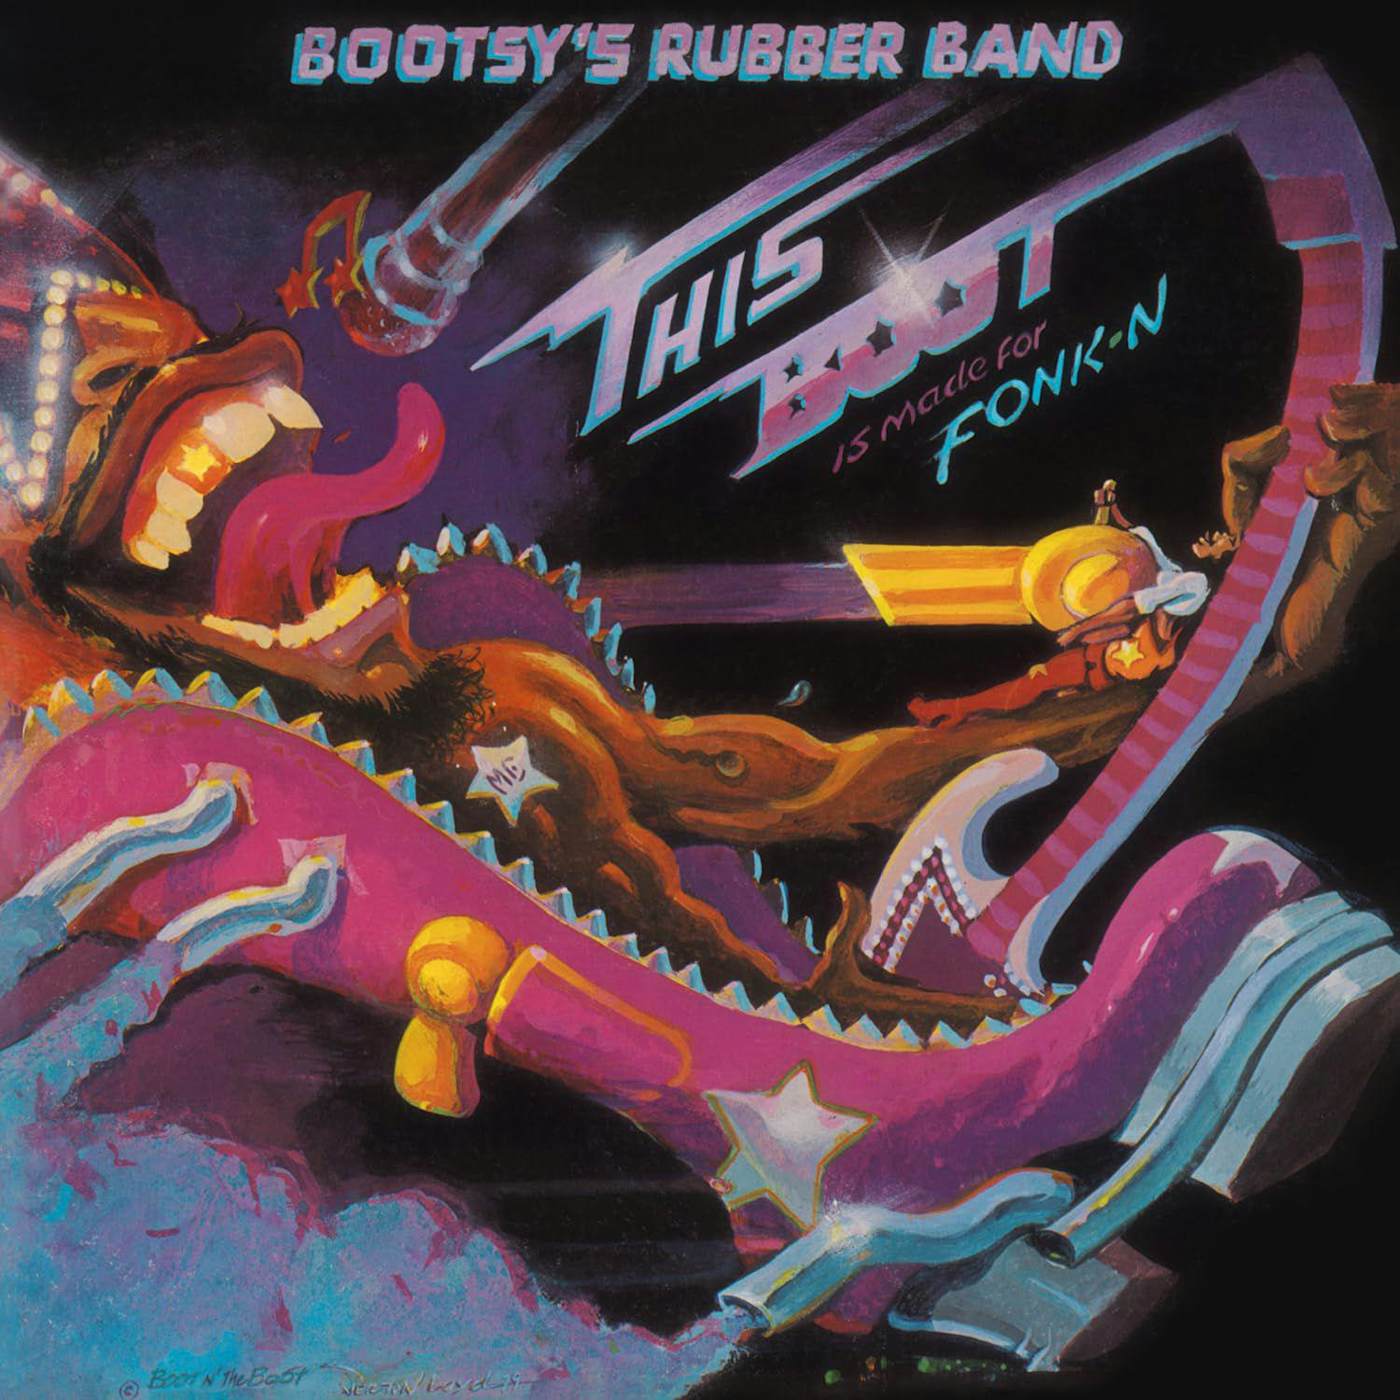 Bootsy's Rubber Band This Boot Is Made For Fonk-n (Translucent Magenta Vinyl/180G) Vinyl Record